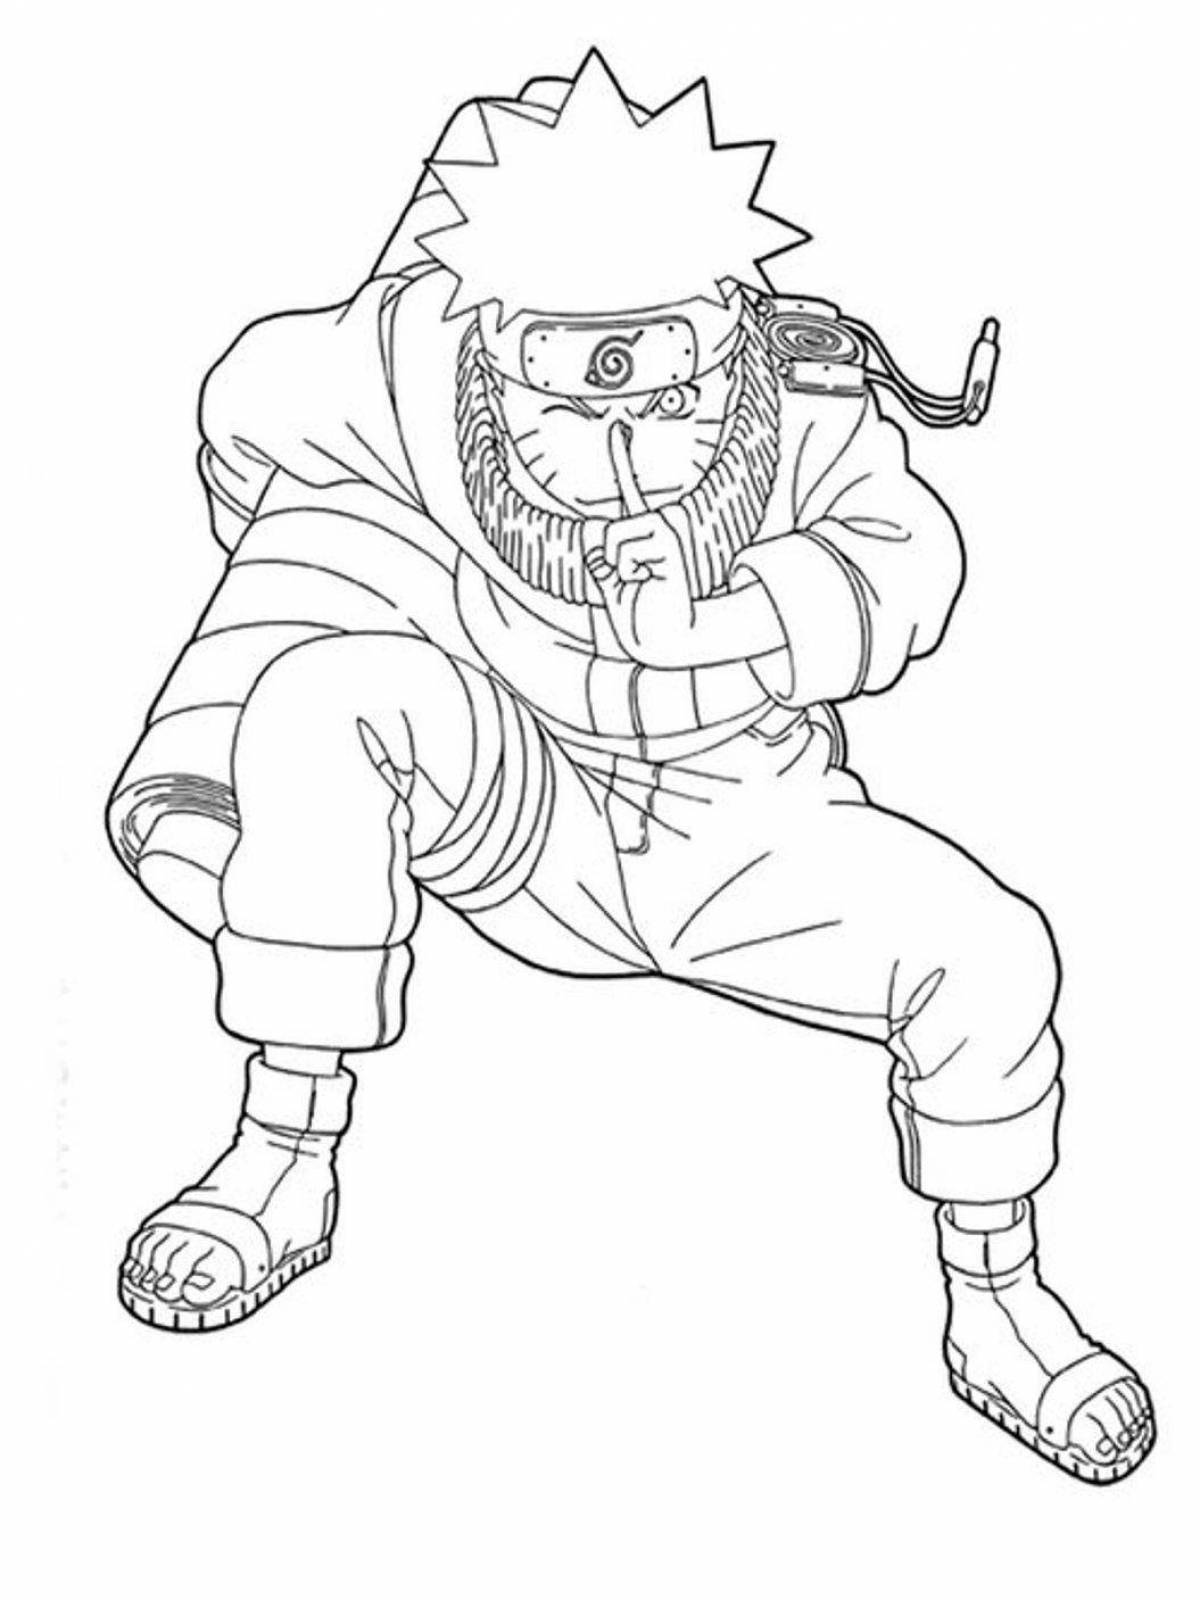 Great naruto coloring book in hermit mode